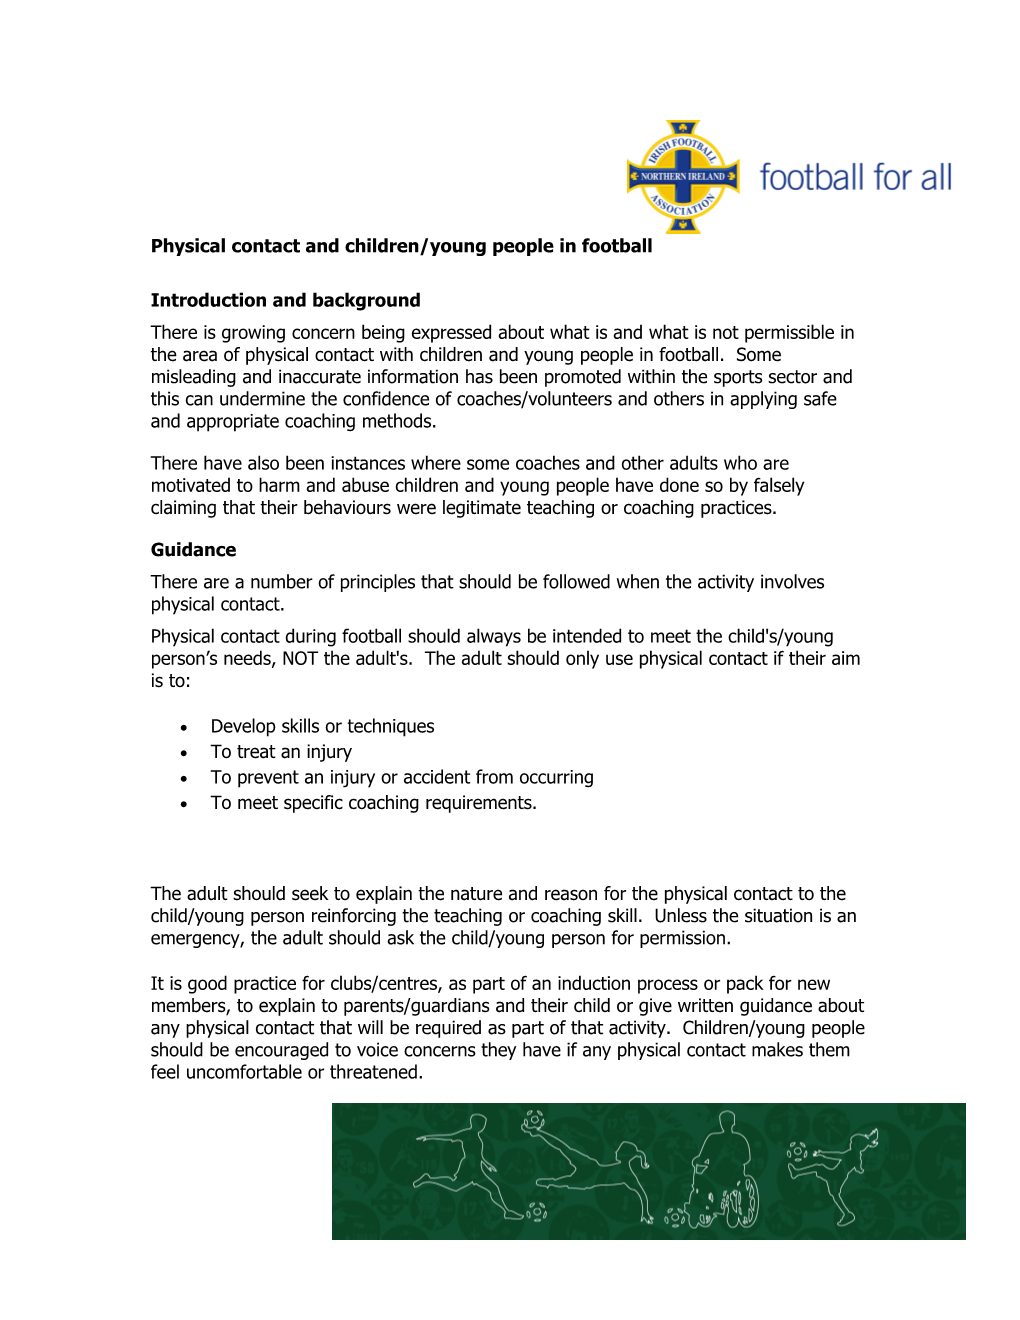 Physical Contact and Young People in Football